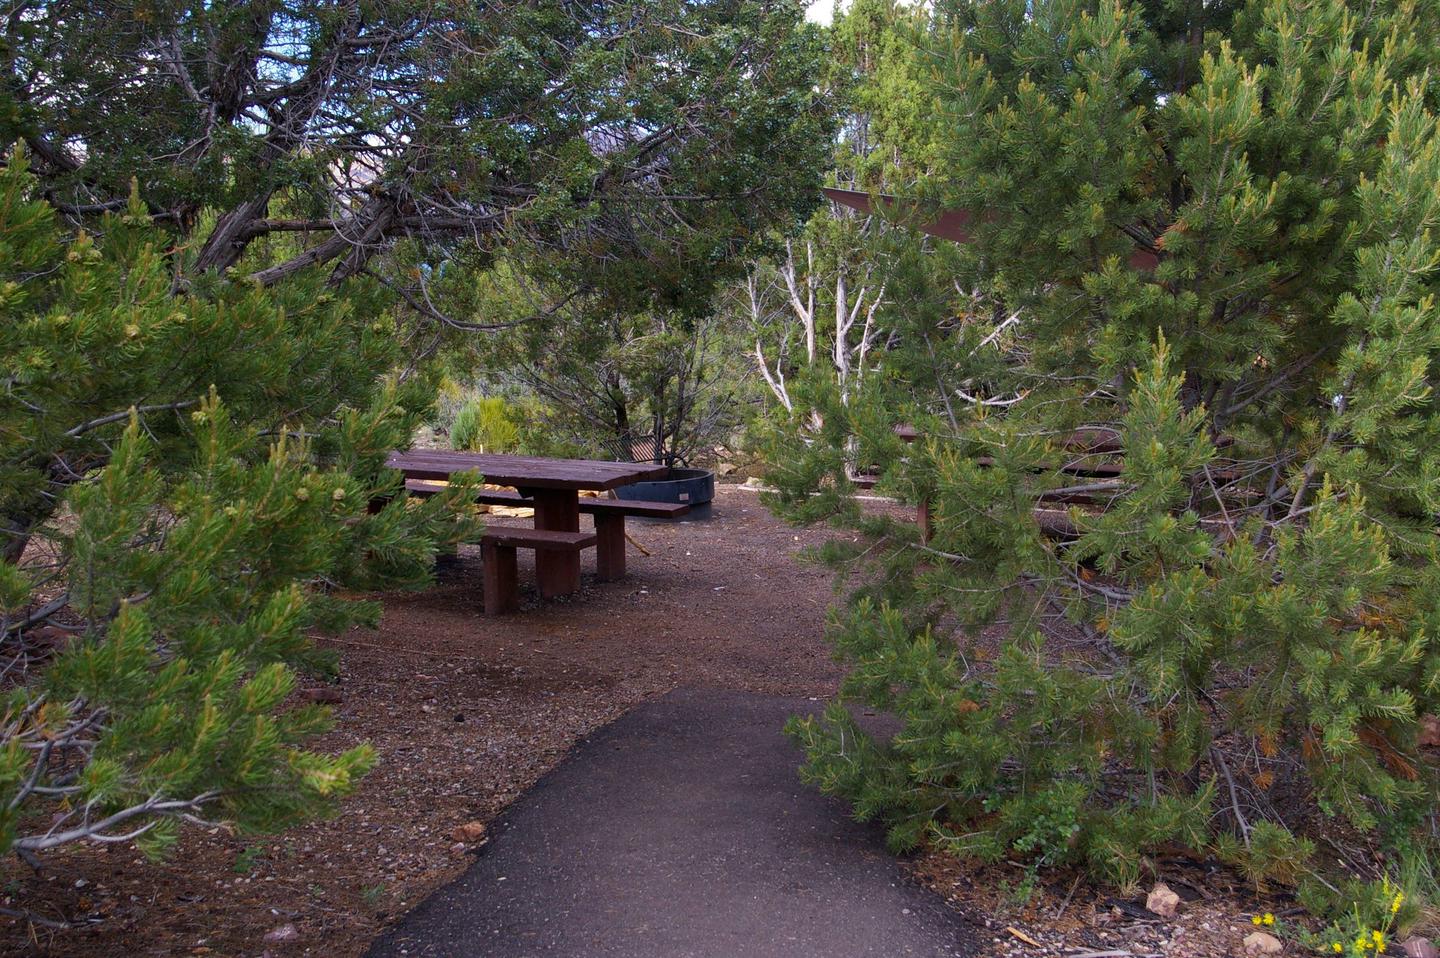 Picnic table tuck away in the middle of a group of trees. An asphalt path leads up to the area.Cedar Springs Campground